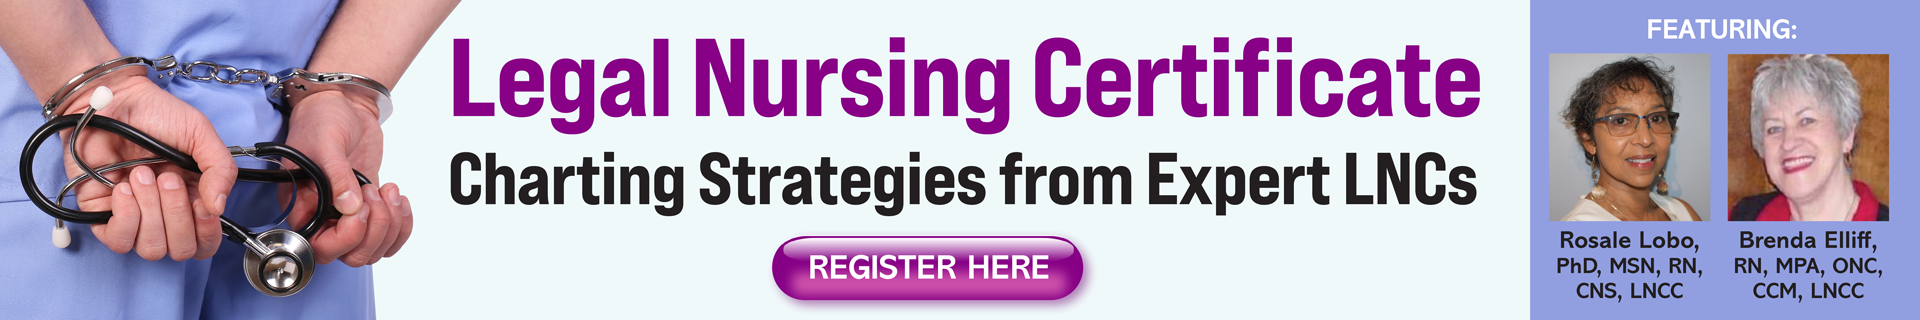 Legal Nursing Certificate: Charting Strategies from Expert LNCs